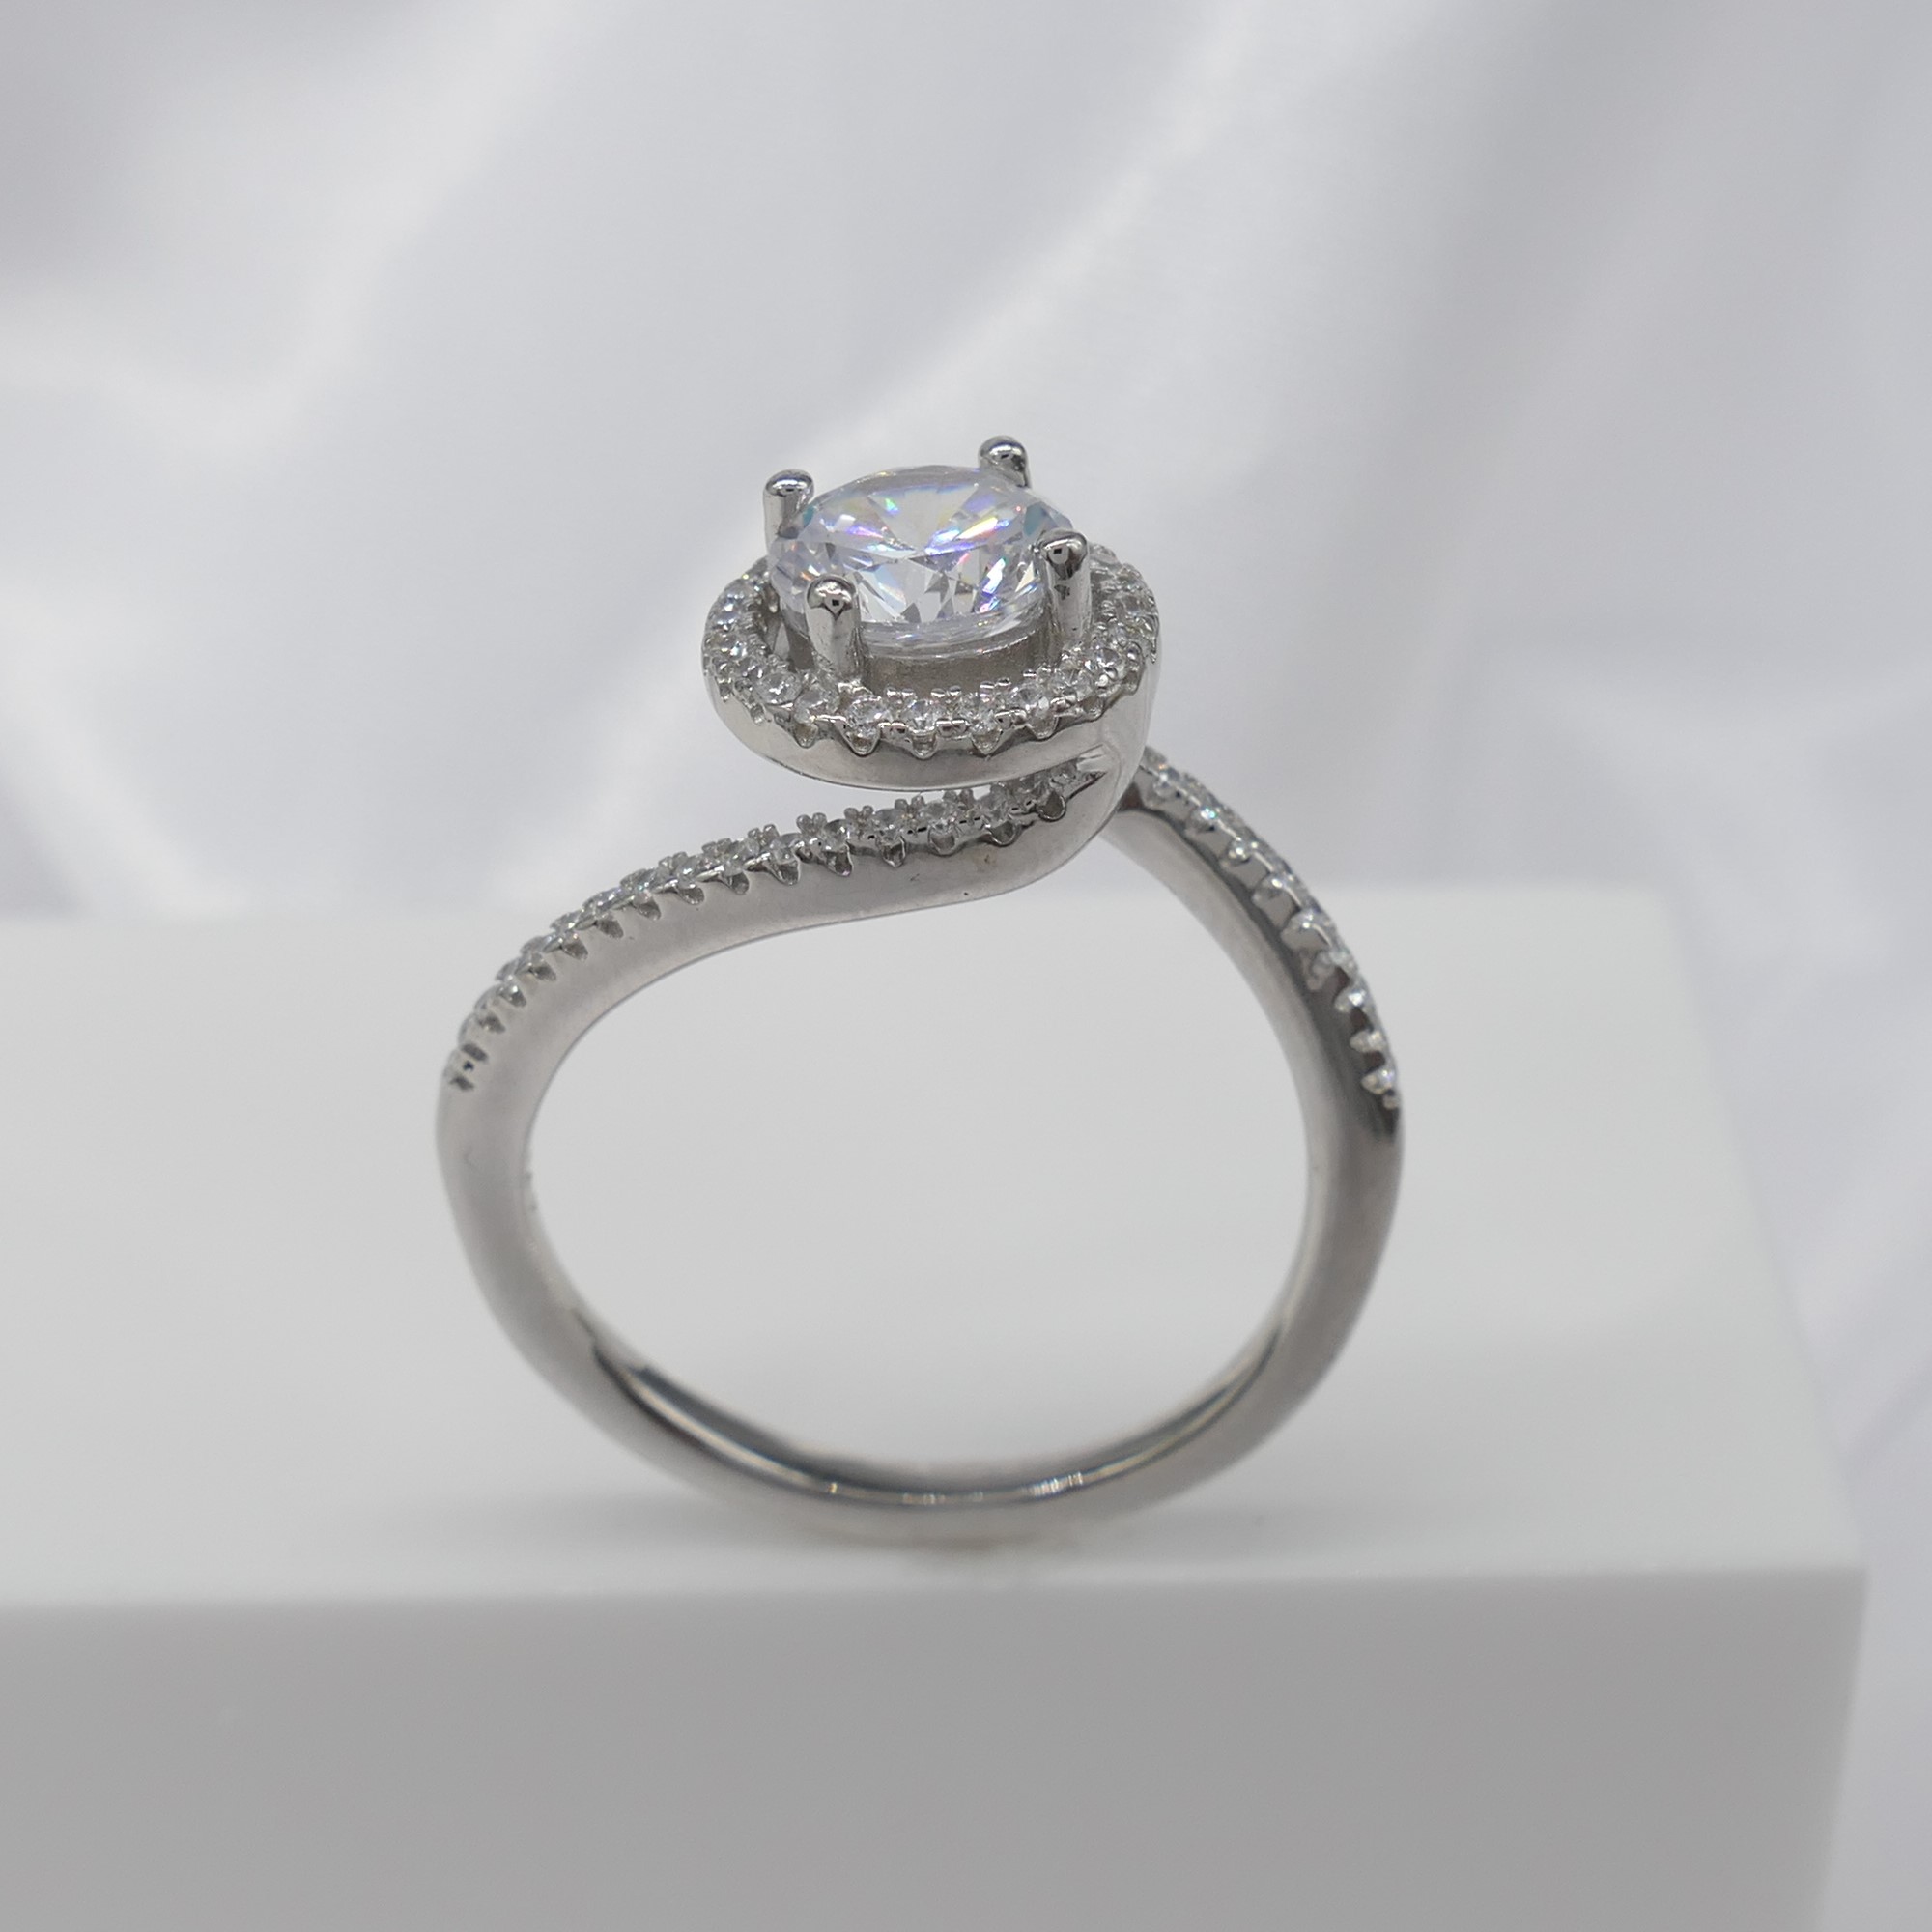 Silver cubic zirconia halo and twist dress ring - Image 2 of 6